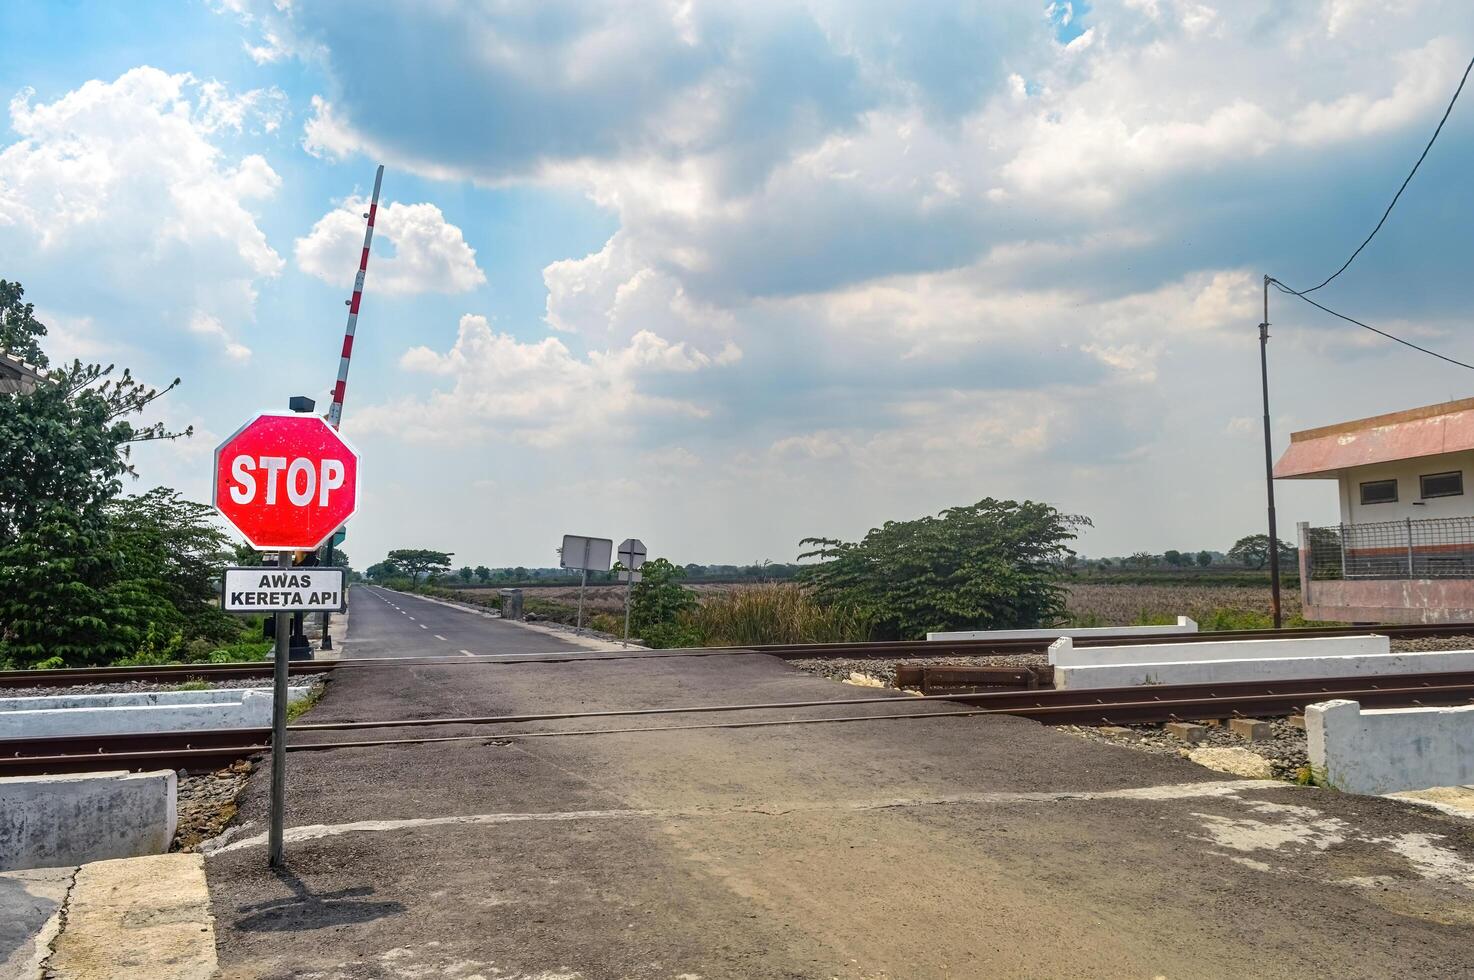 a deserted railroad crossing with no vehicles passing by. photo